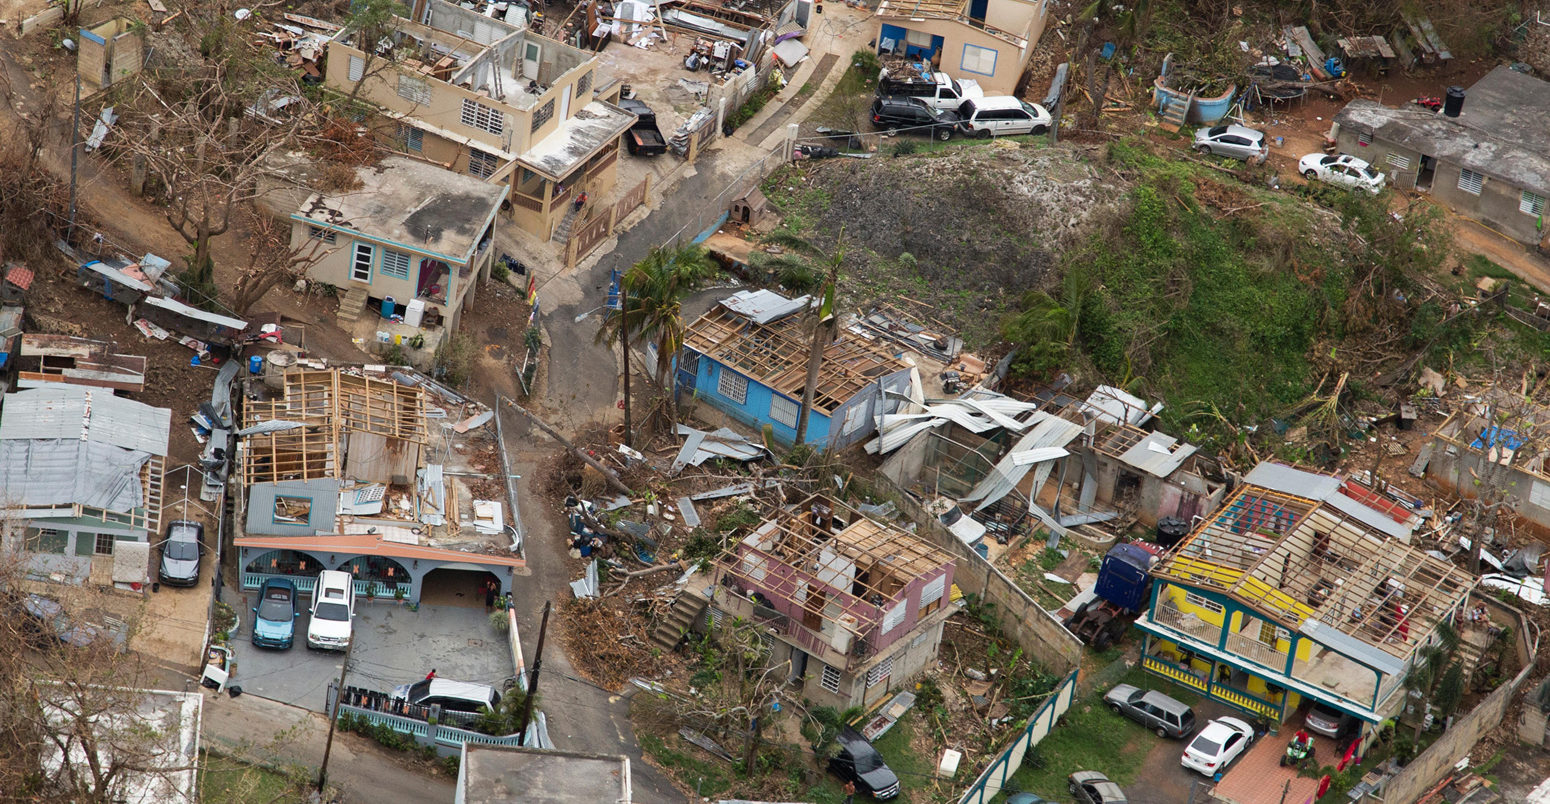 Aerial view of houses in Puerto Rico without roofs due to the strong winds brought by Hurricane Maria